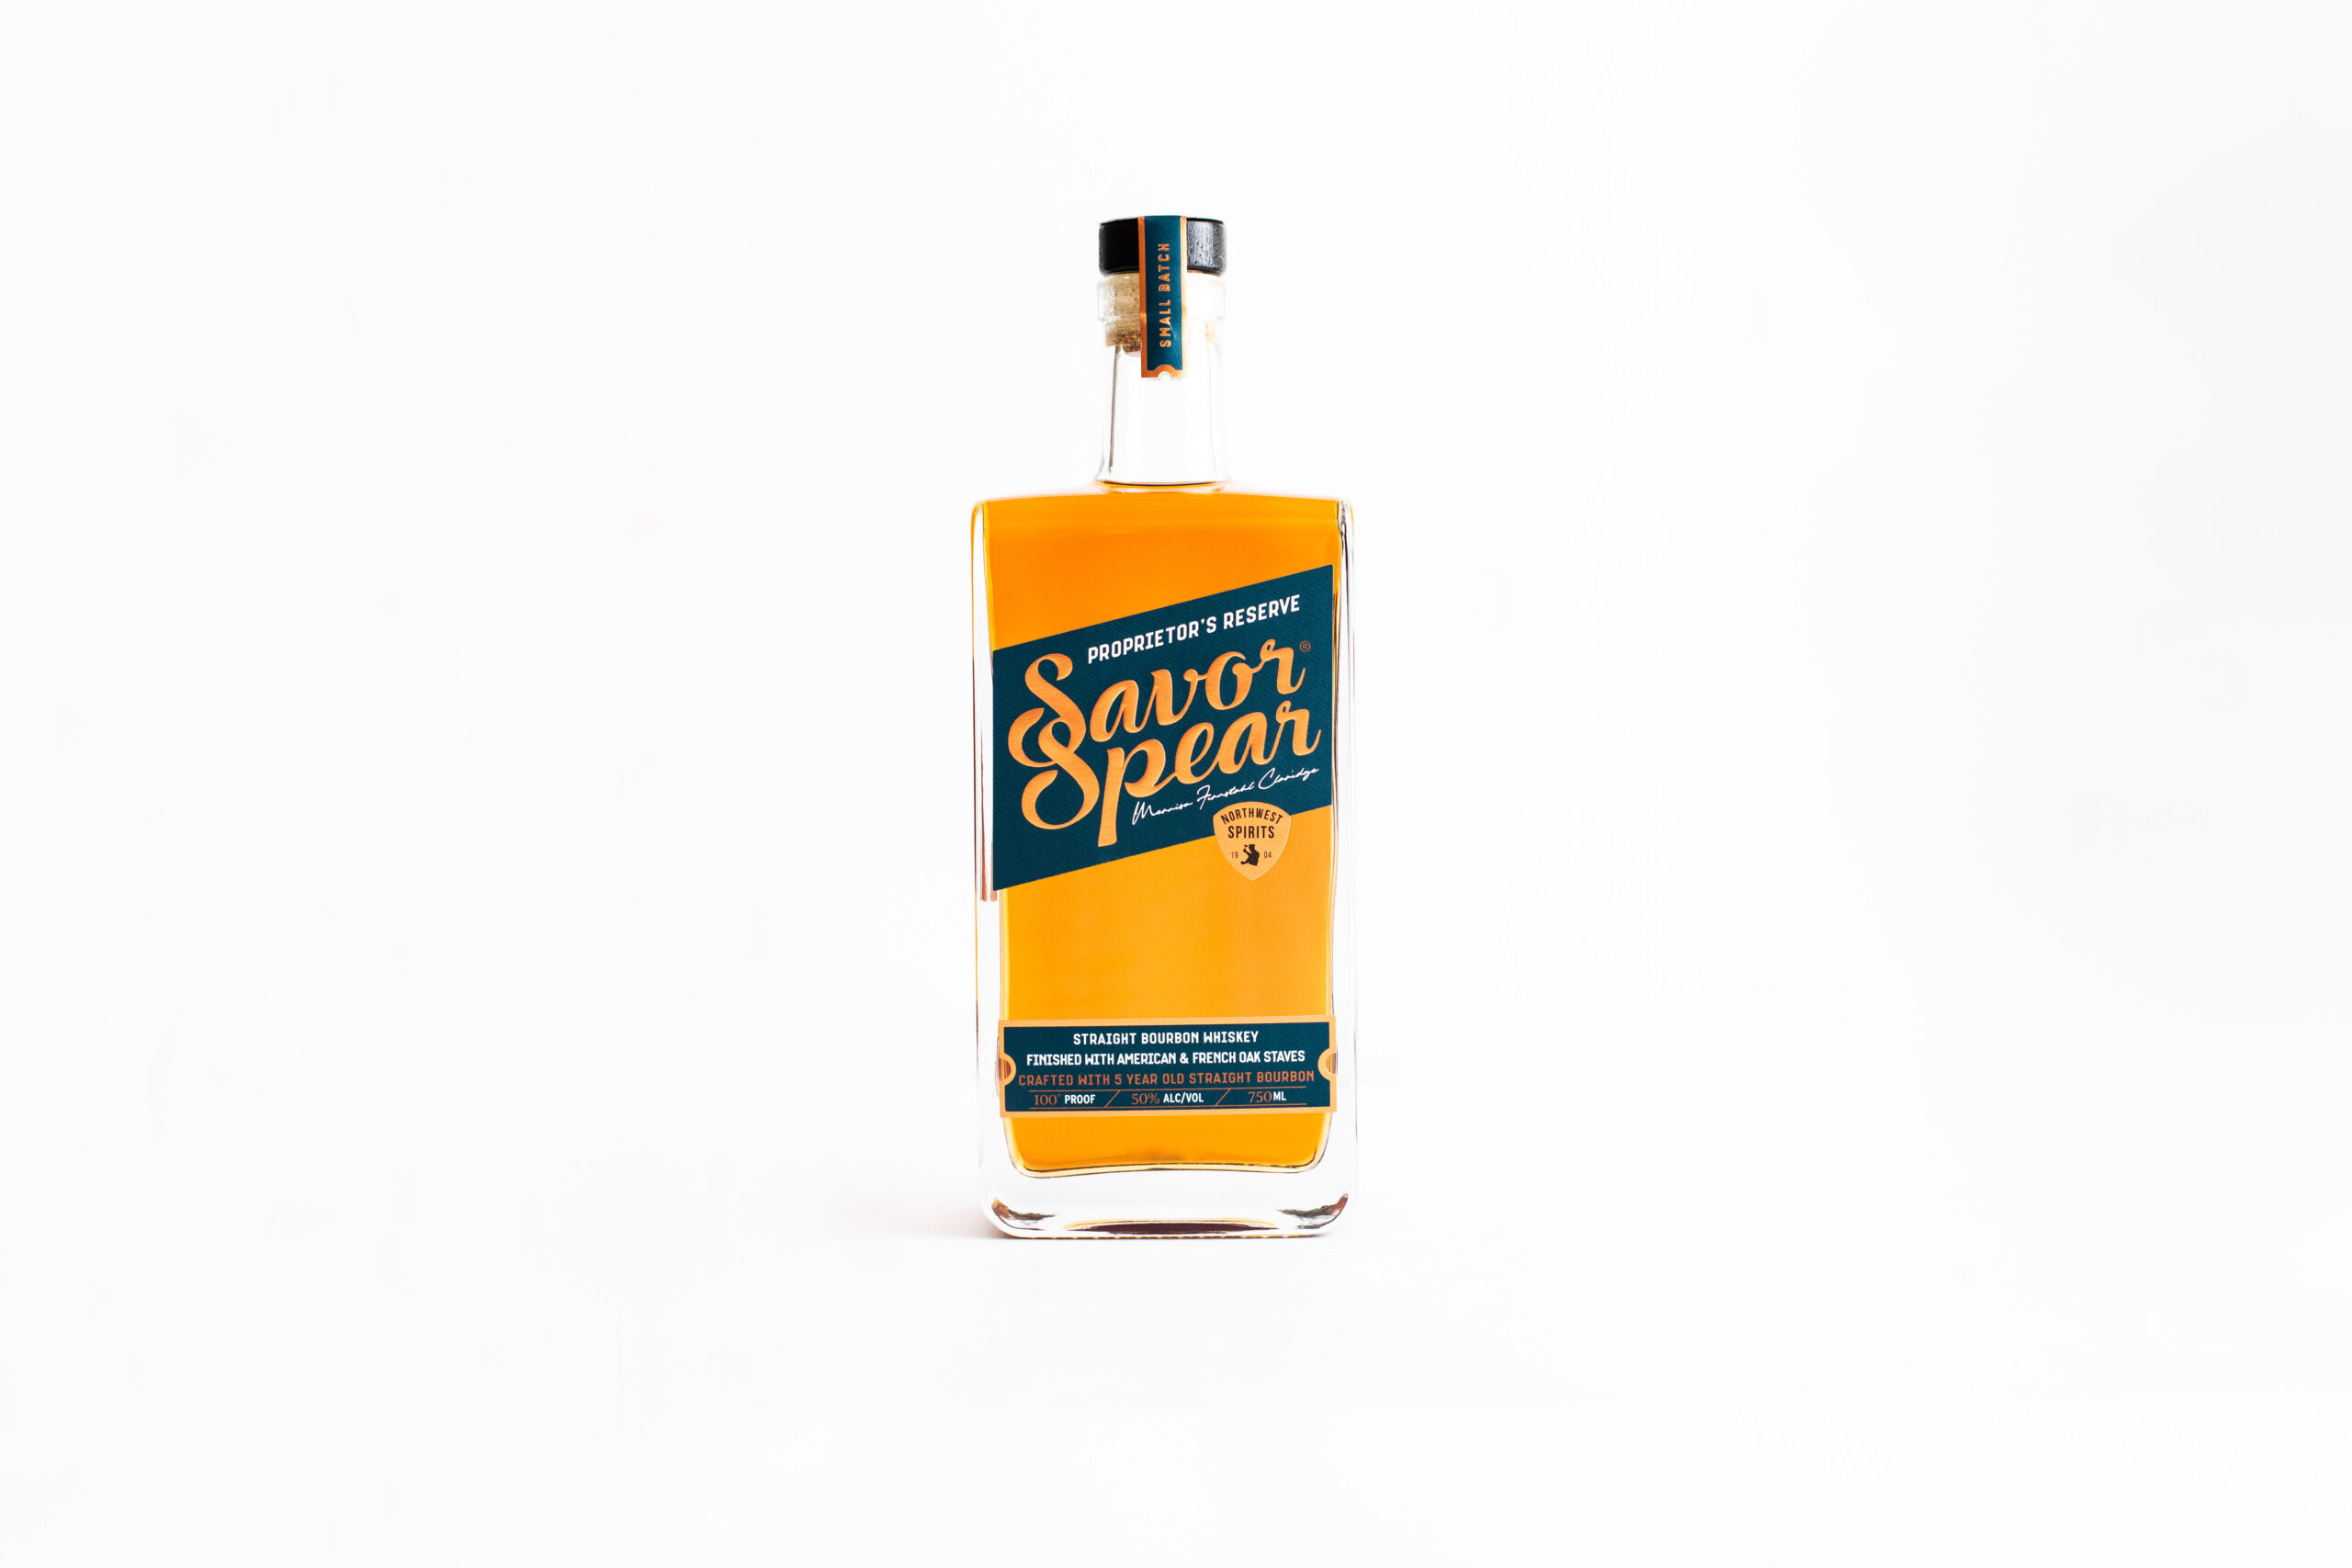 A bottle of Savor Spear Classic Proprietor's Reserve Bourbon sits on a clean white backdrop